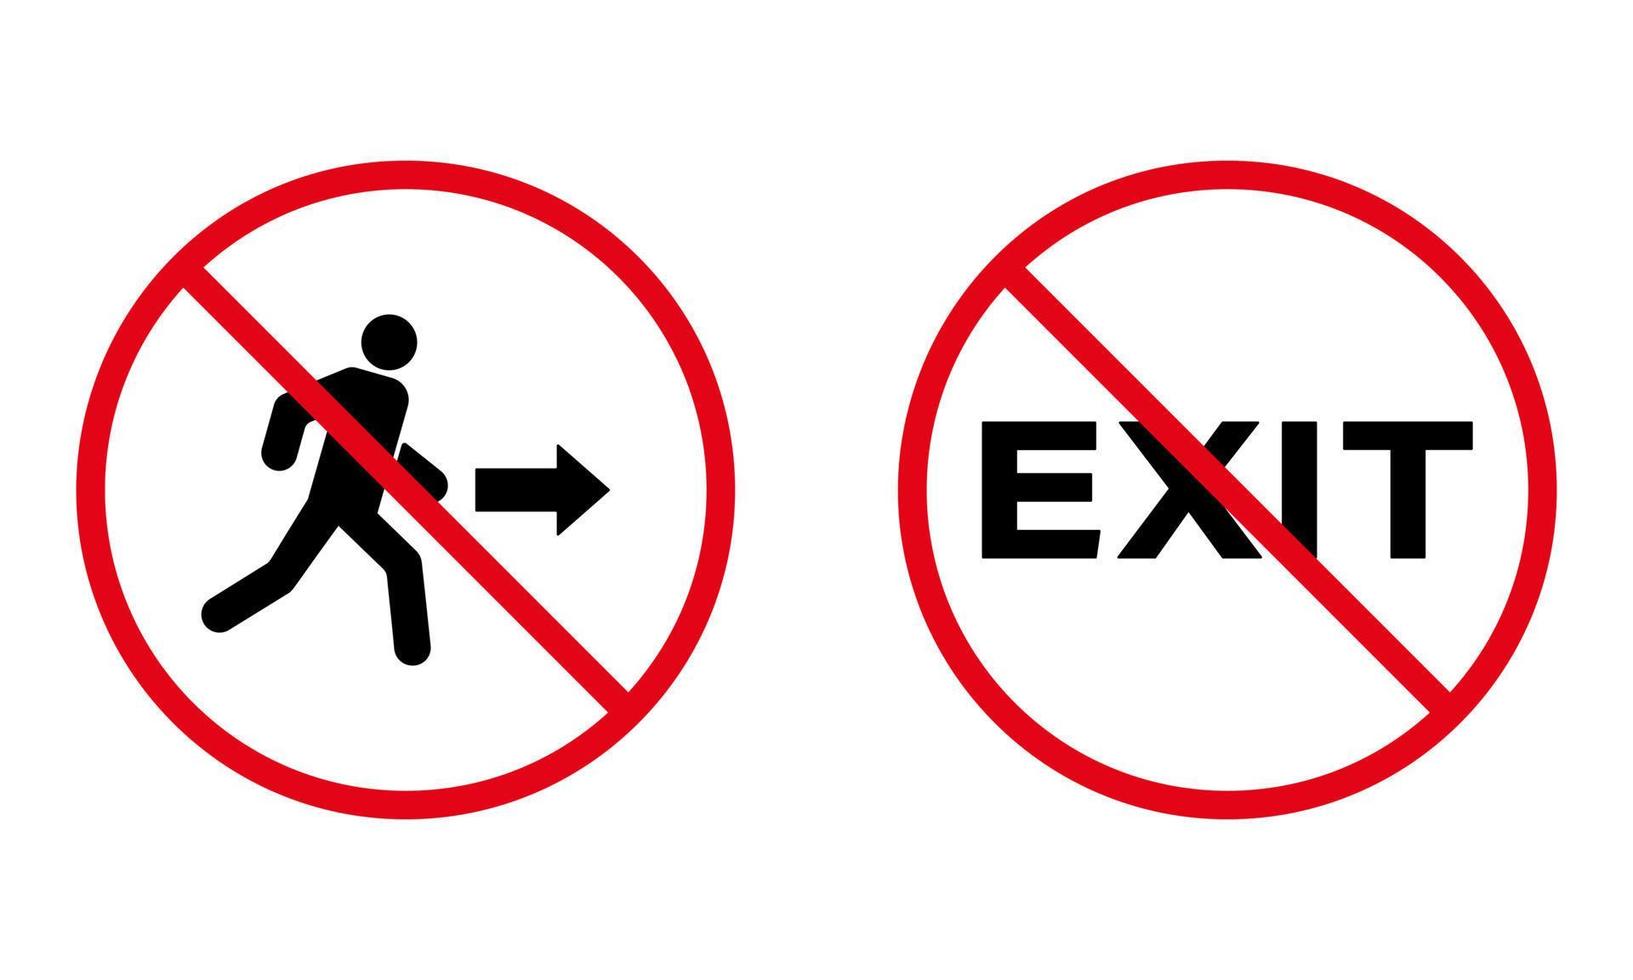 Forbid Person Way Escape Pictogram. Emergency Red Stop Circle Symbol. Ban Exit Black Silhouette Icon. Prohibit Man Run Leaving. No Allowed Evacuation in Building Sign. Isolated Vector Illustration.